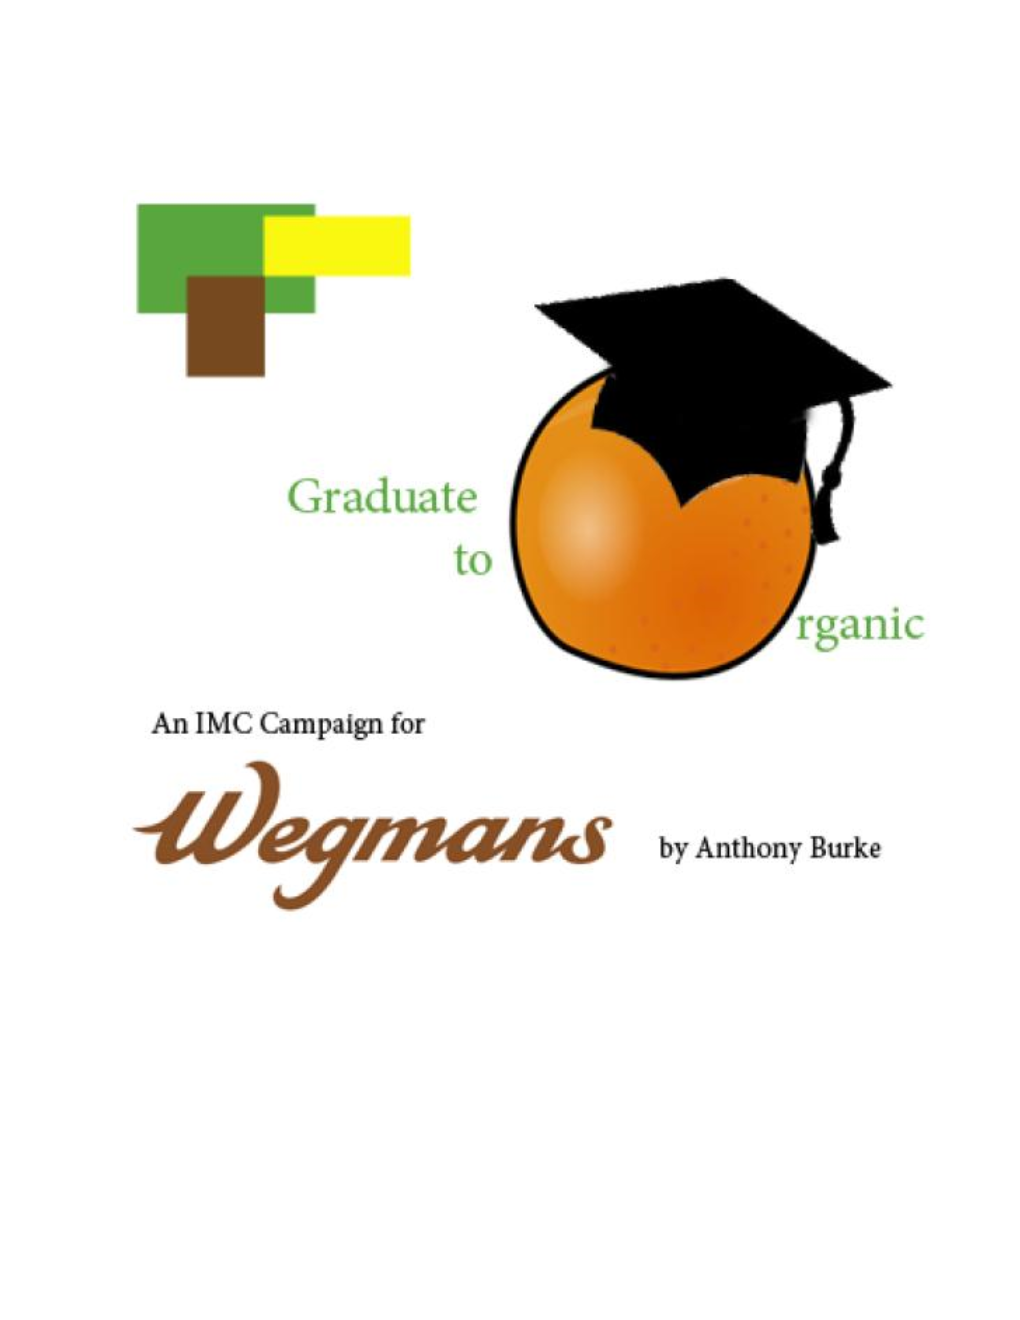 Wegmans Food Markets Is a Grocery Retailer That Has Enjoyed Considerable and Enduring Success While Displaying Wisdom Through Adaptability